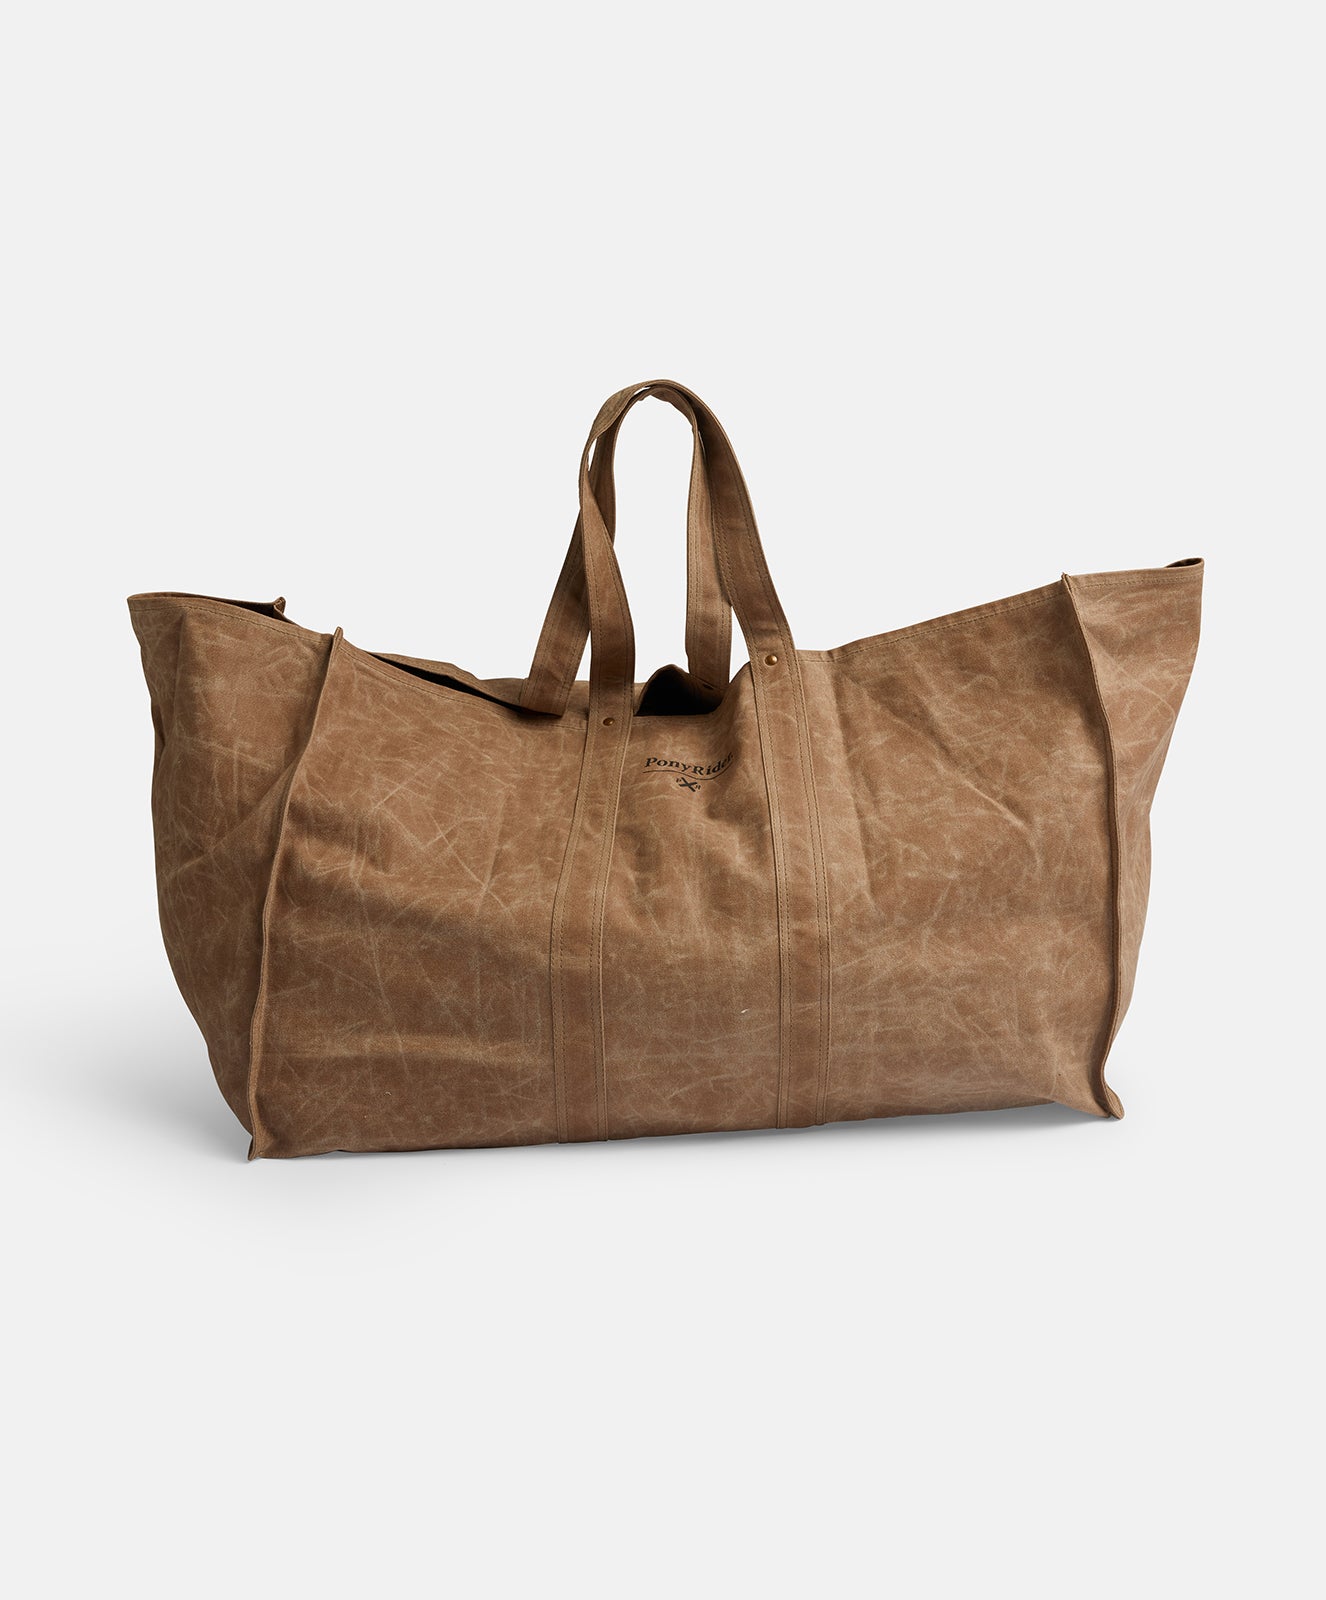 Market Carry All Canvas Tote Bag | Toffee Brown